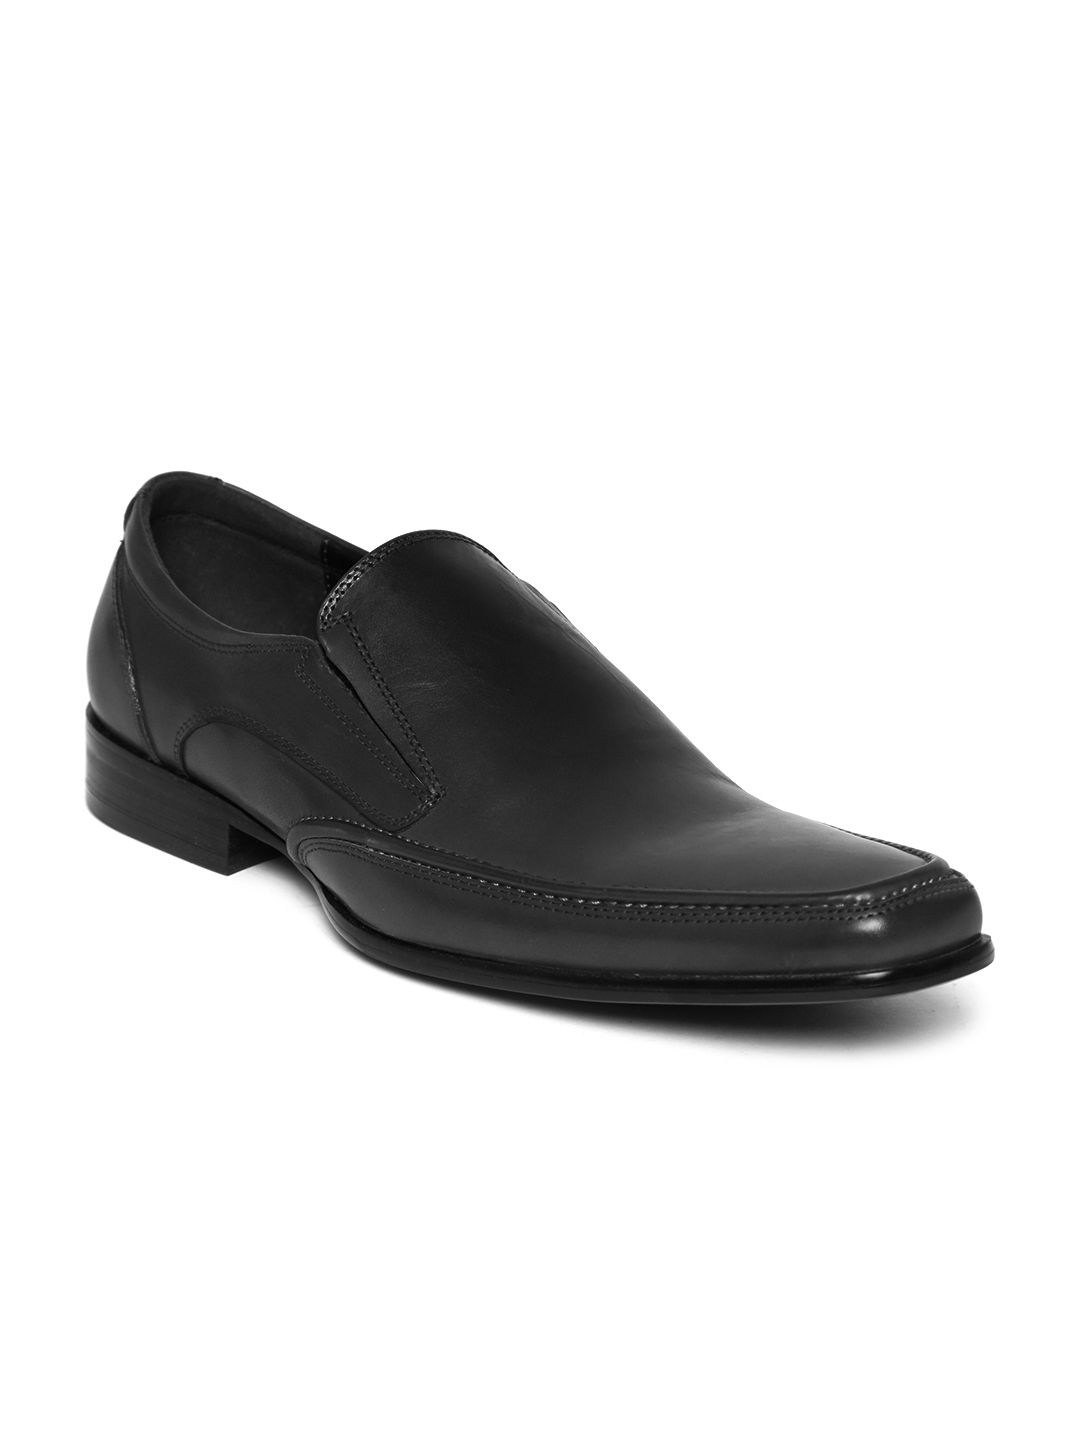 Kenneth Cole REACTION Black Formal Shoes Price in India- Buy Kenneth ...